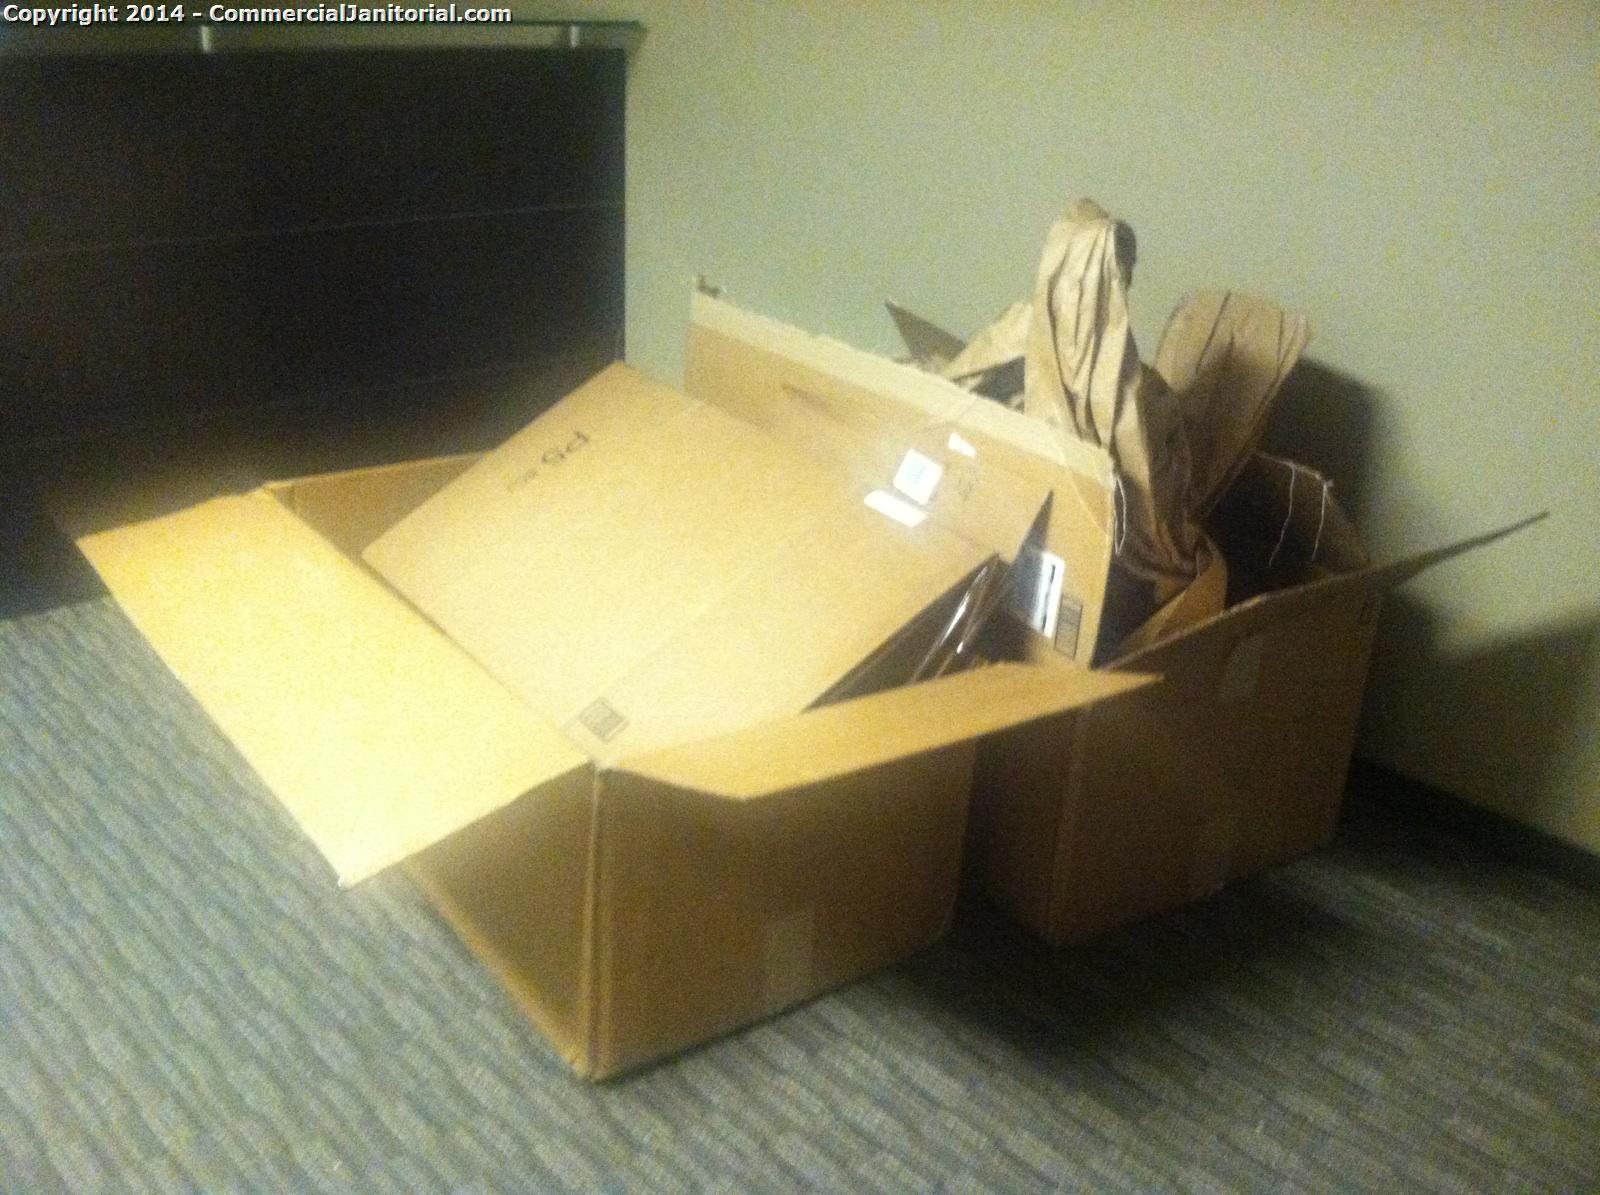  Suite 370 there is a large empty box and we need to know if is trash. 